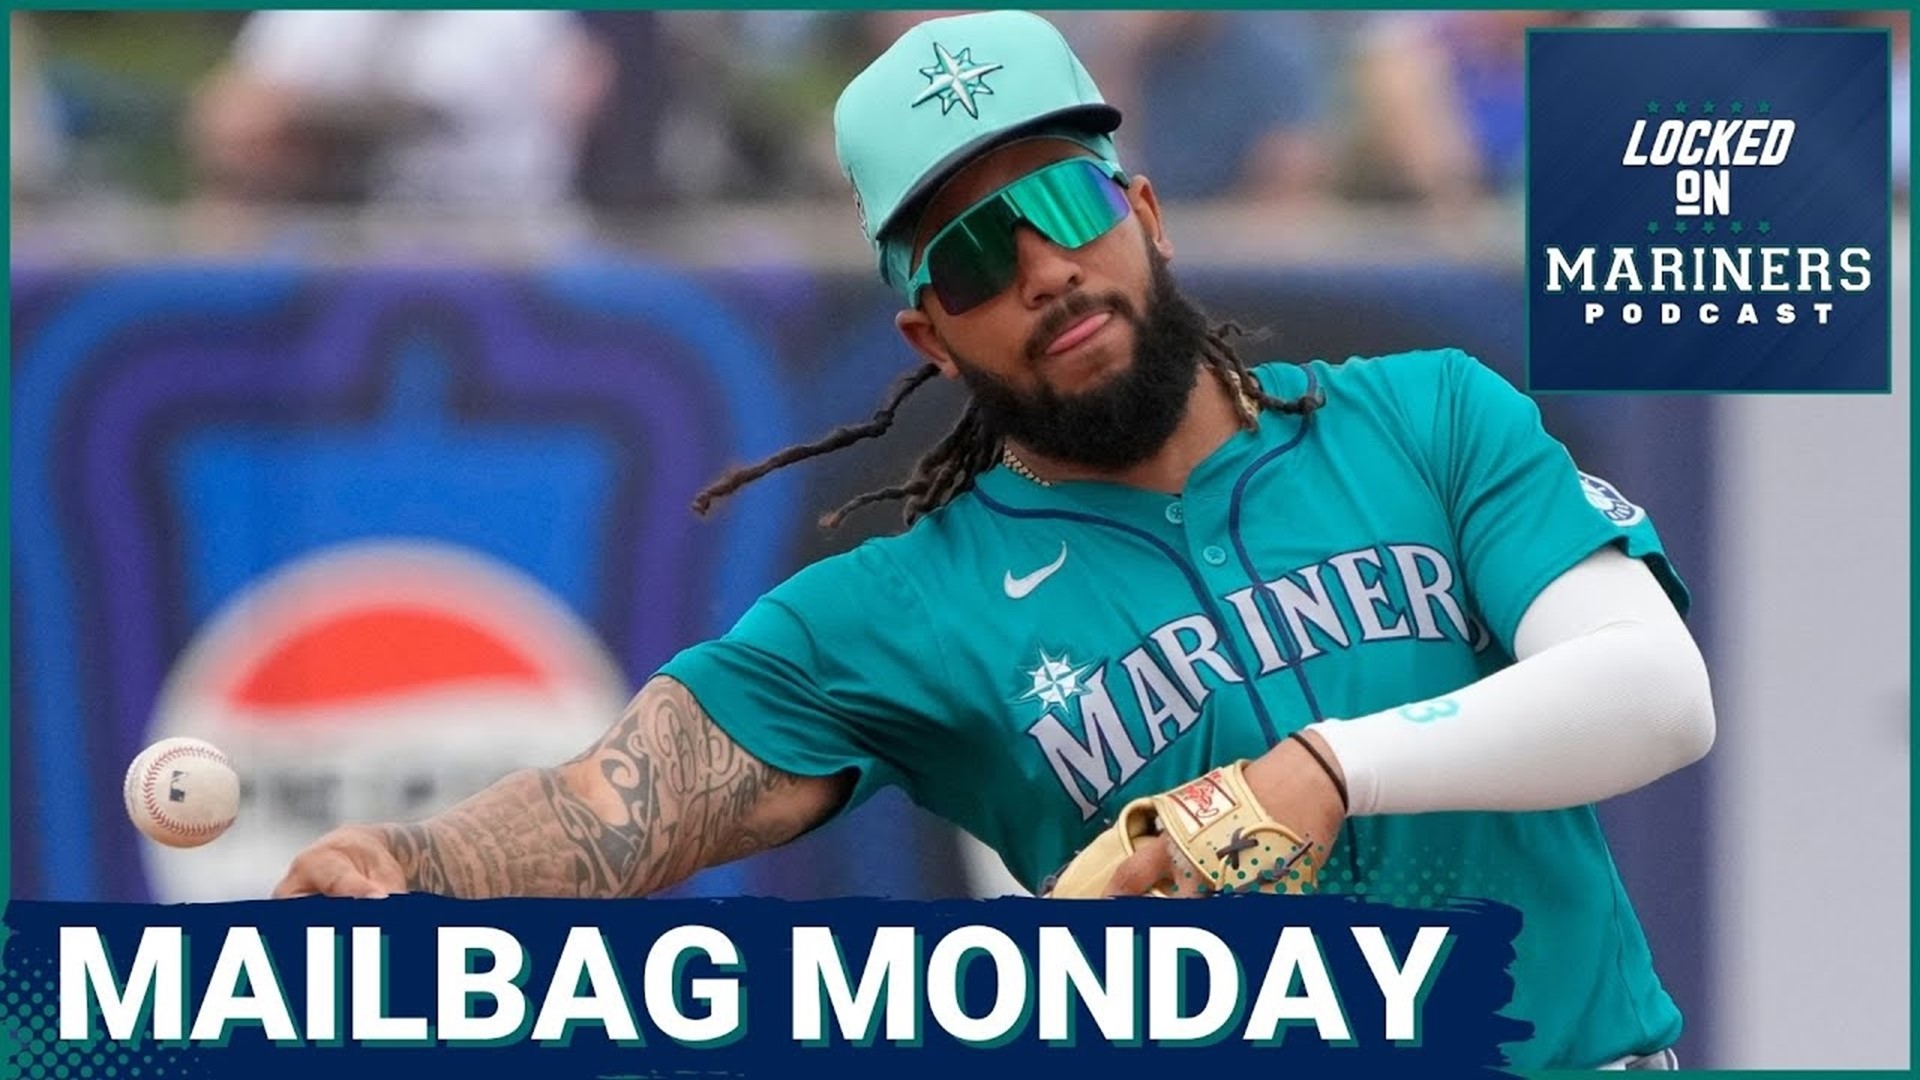 It's the last Mailbag Monday before Opening Day! Ty and Colby answer some of your Mariners questions.